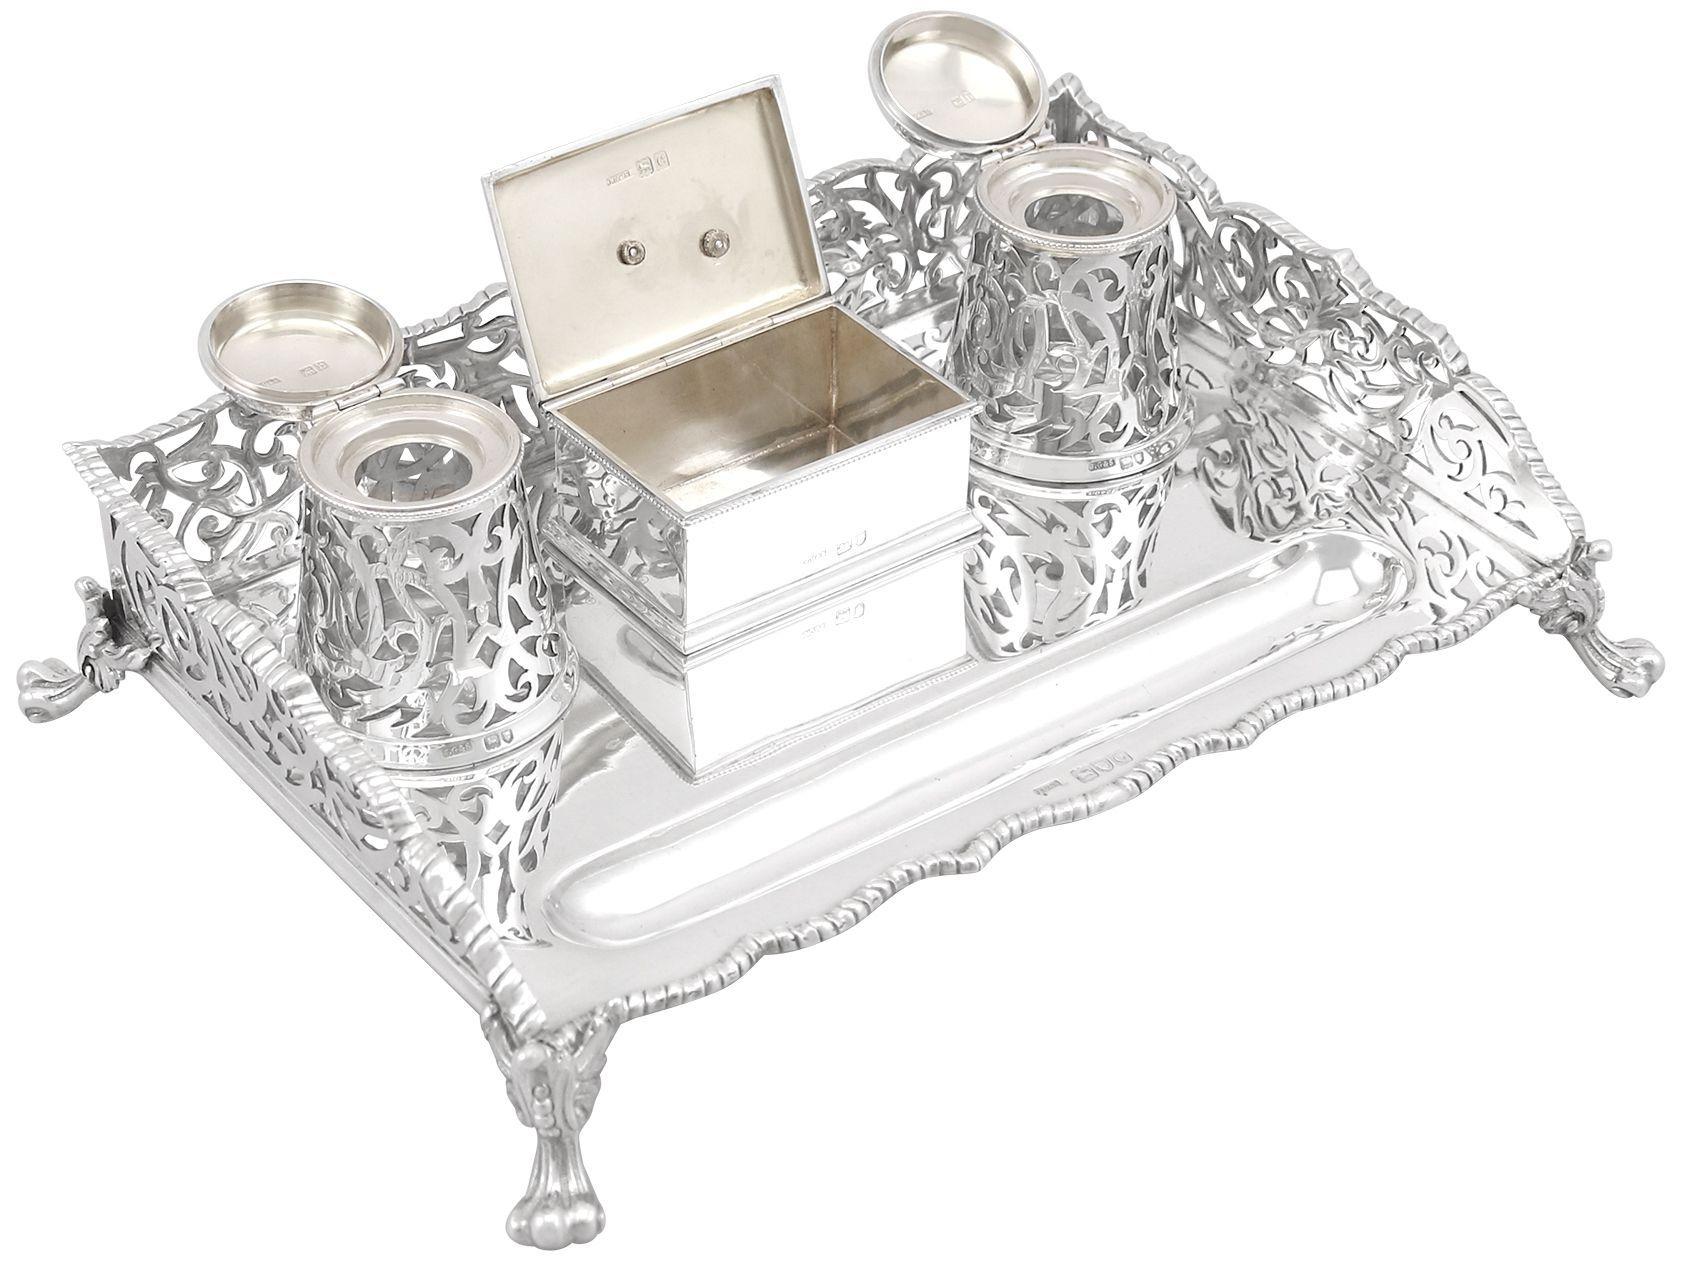 Antique Victorian 1898 Sterling Silver Gallery Inkstand by John Grinsell & Sons In Excellent Condition For Sale In Jesmond, Newcastle Upon Tyne